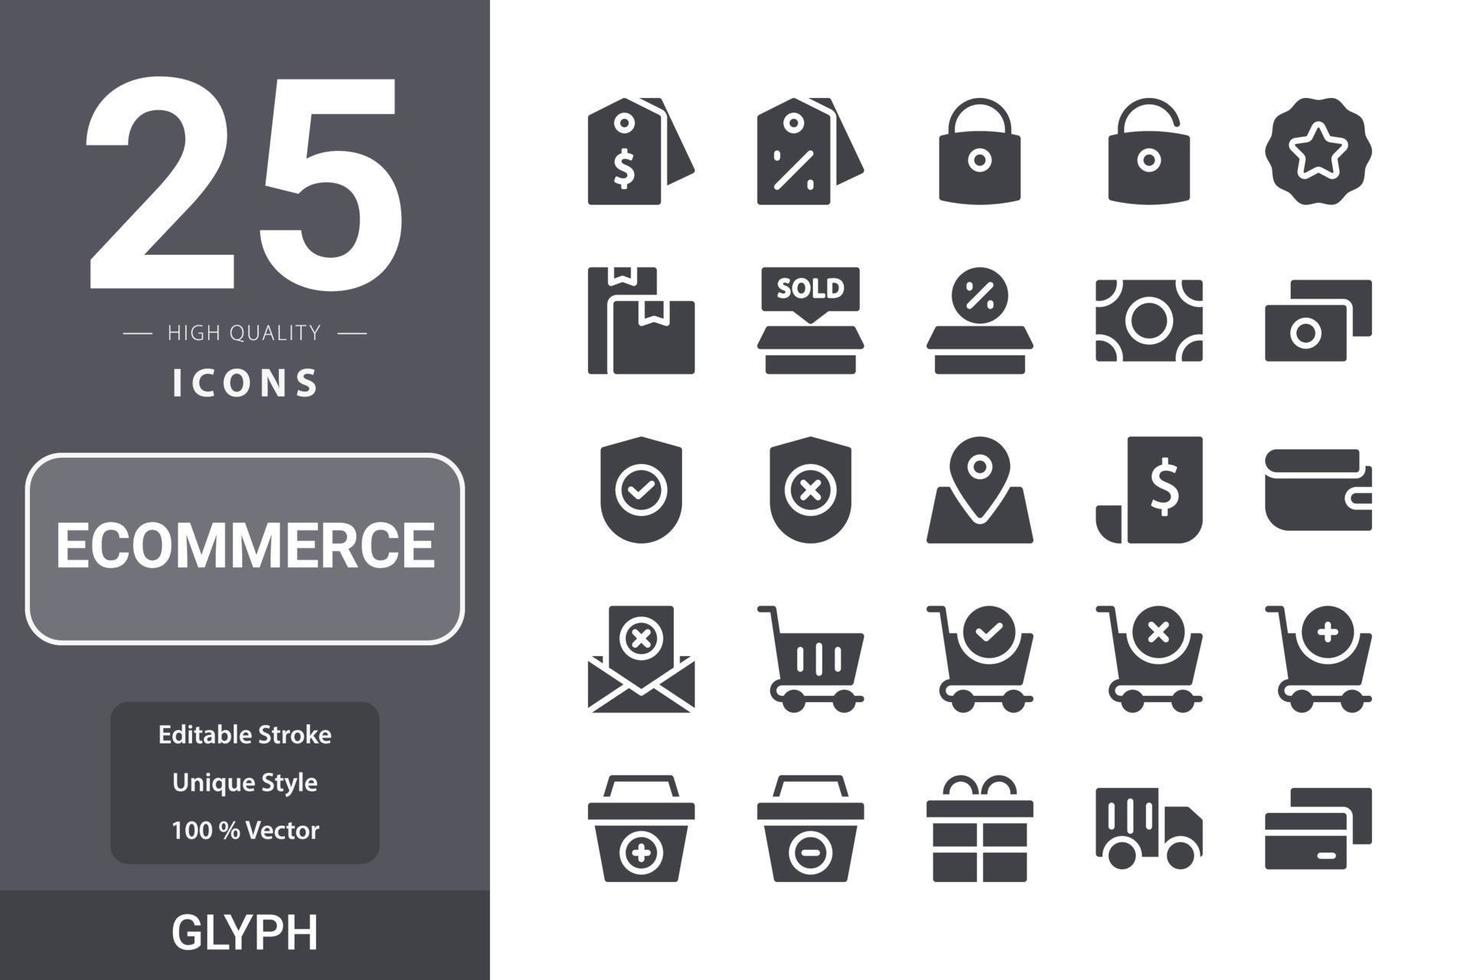 Ecommerceicon pack for your web site design, logo, app, UI. Ecommerce icon glyph design vector